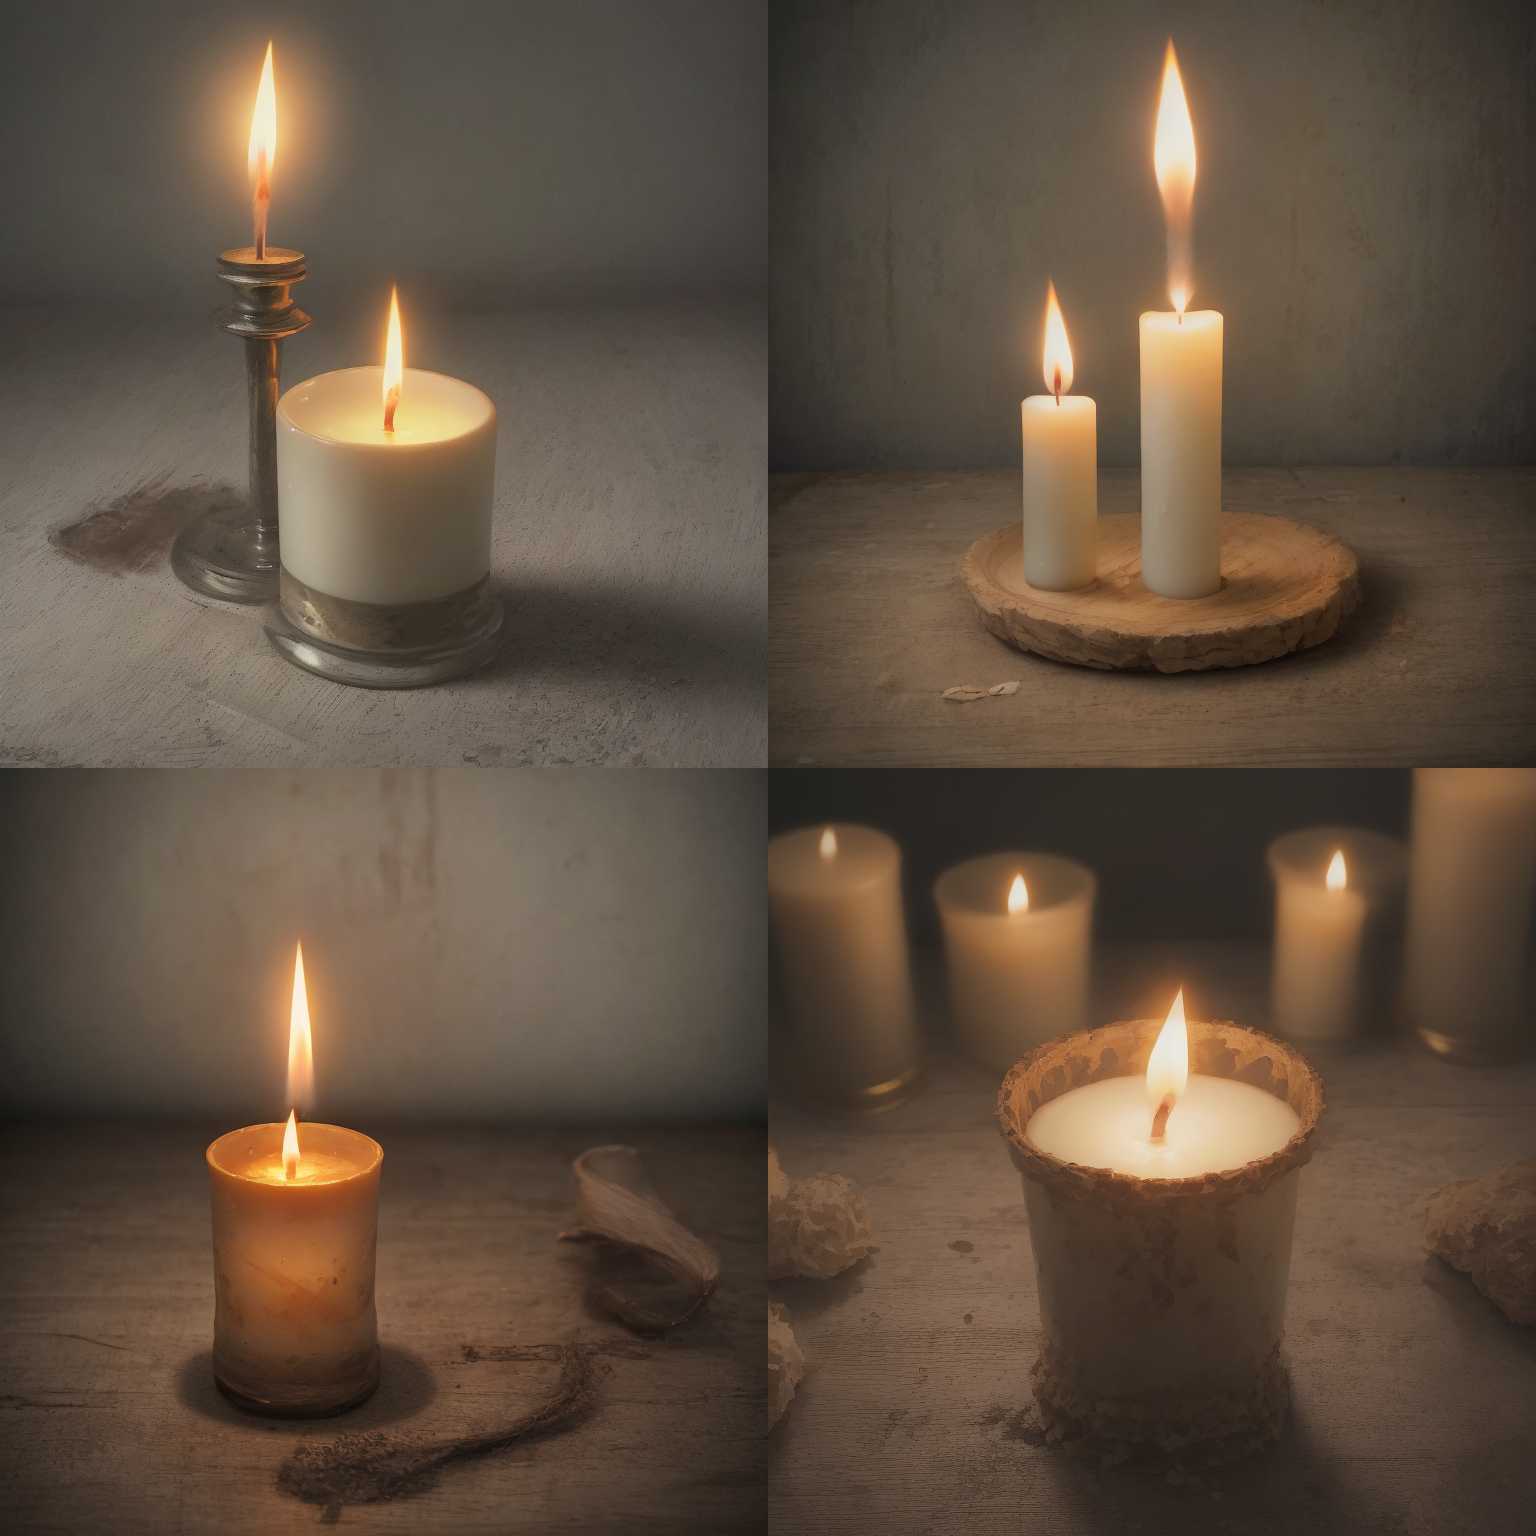 A candle just starting to burn